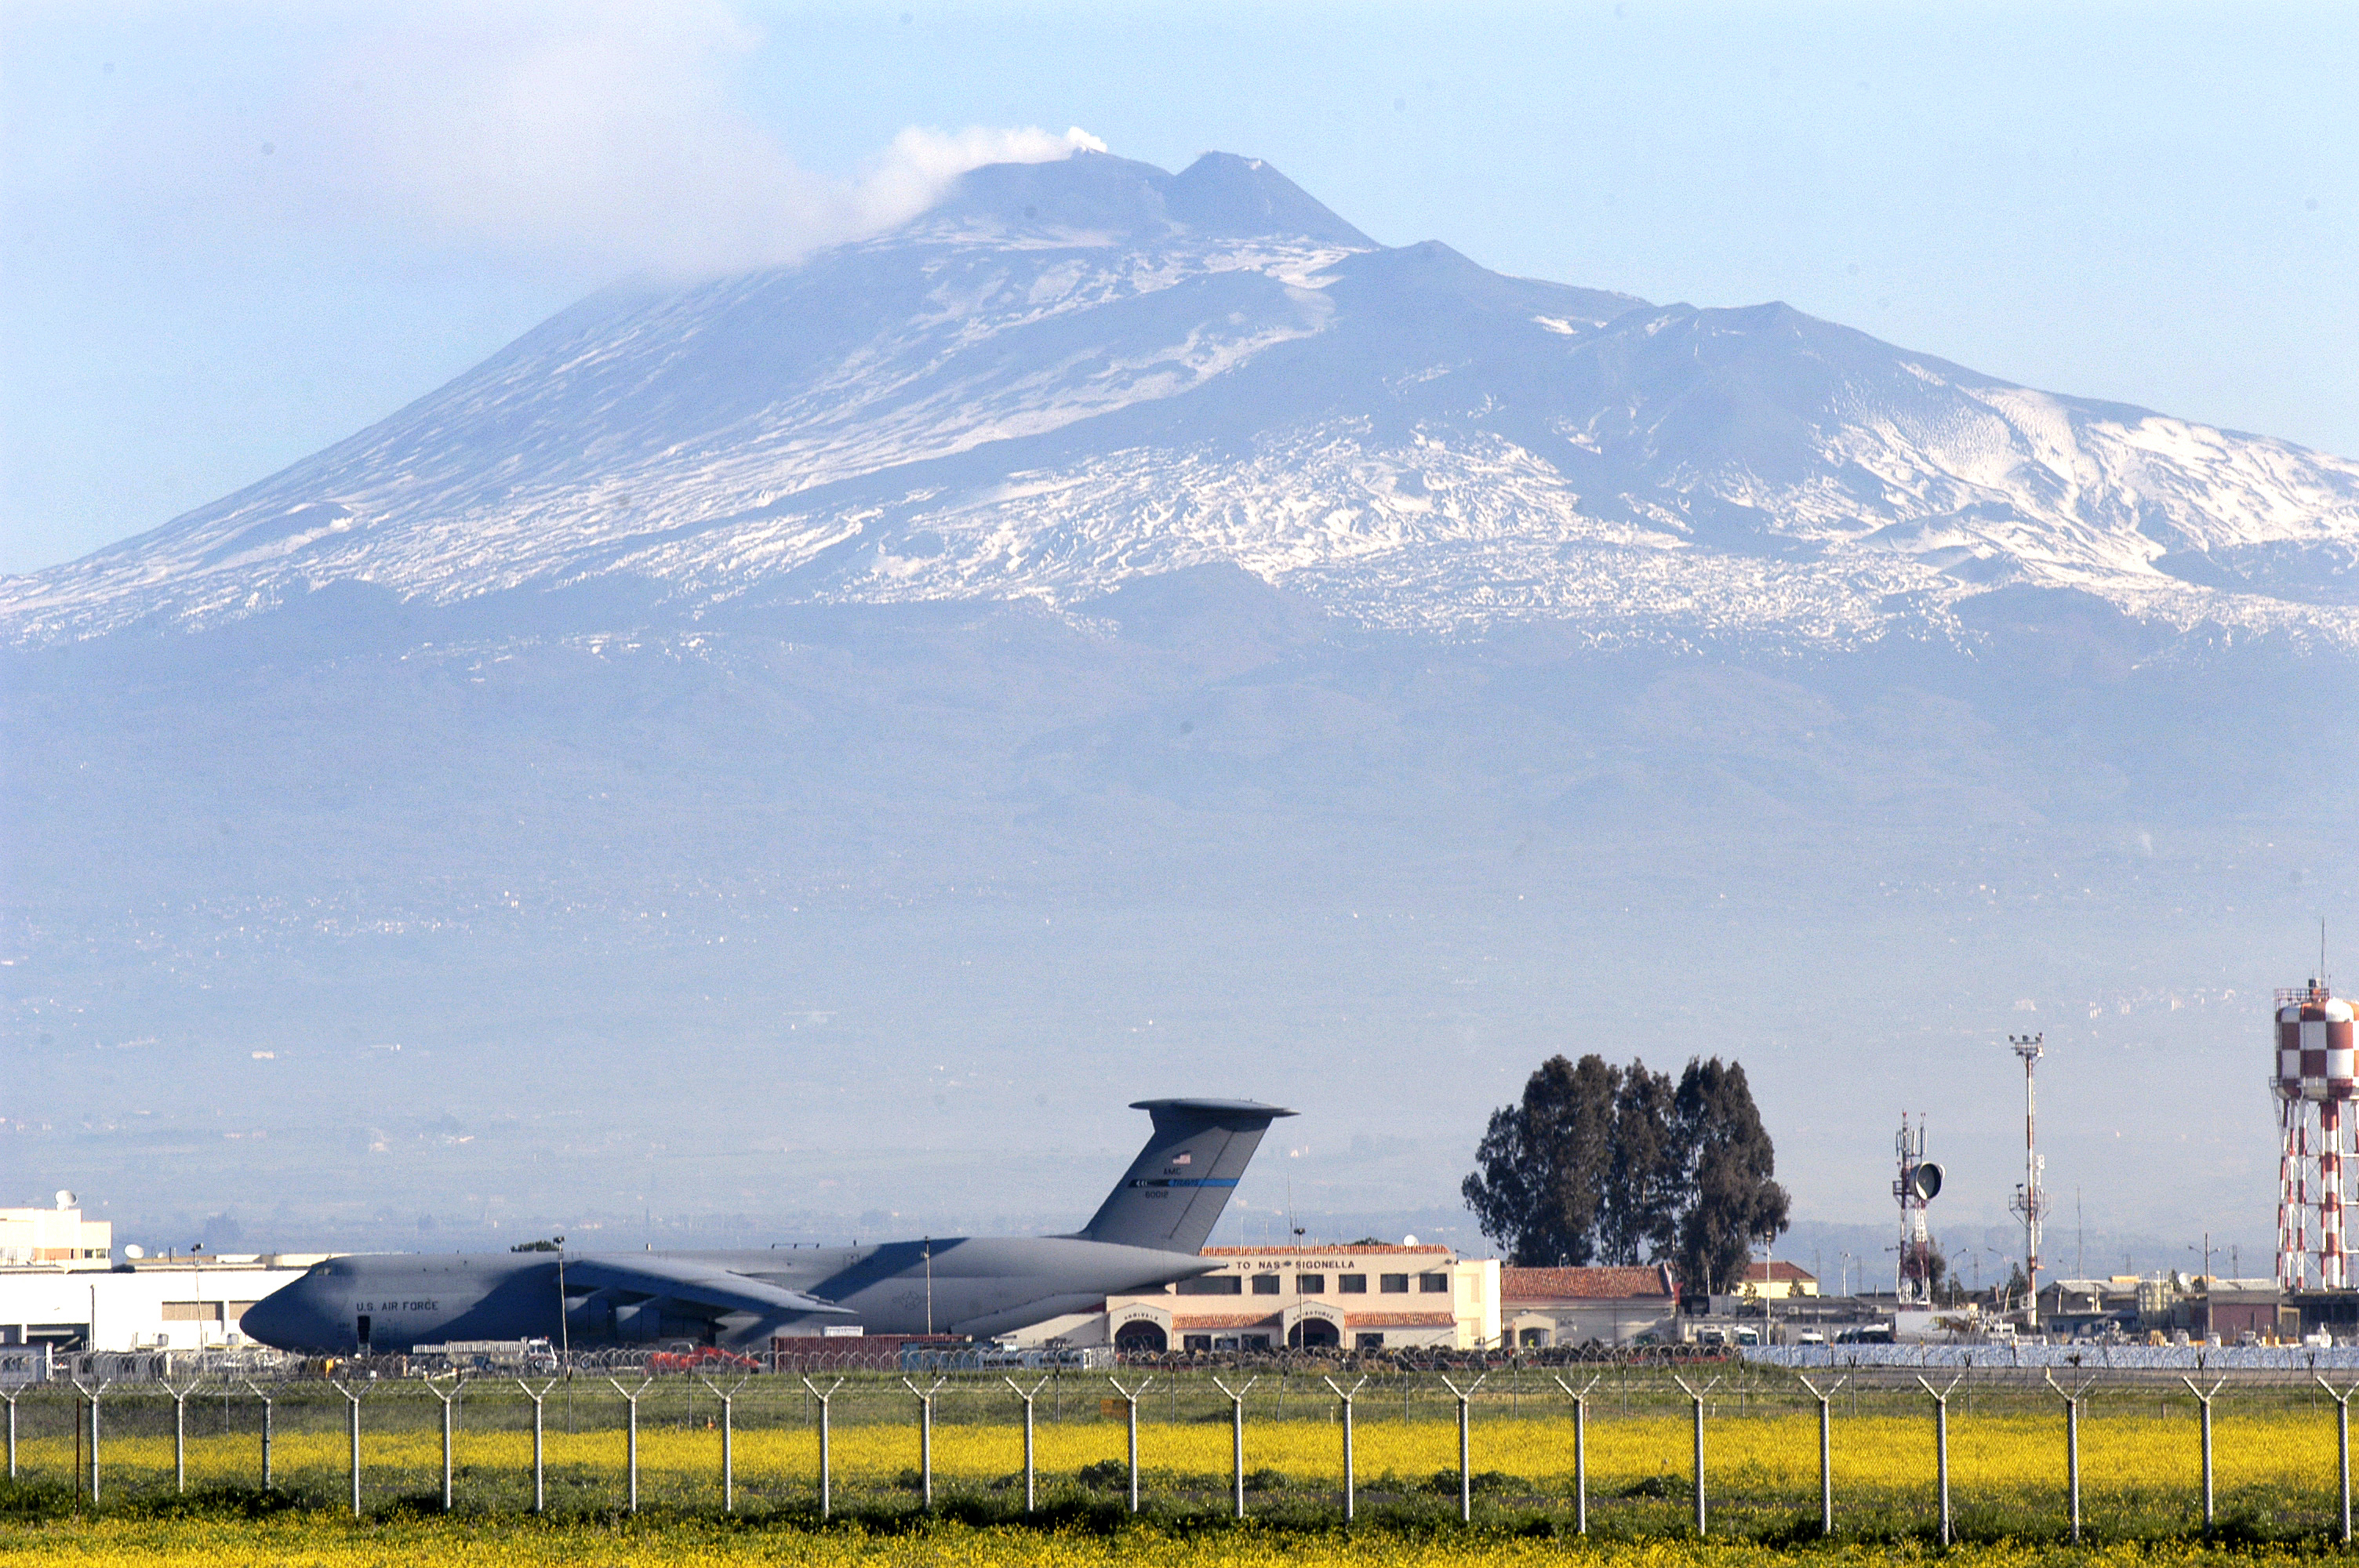 US Navy 030325-N-9693M-001 Sicily's volcano, Mt. Etna, is the backdrop for a U.S. Air Force C-5 and the air terminal of Naval Air Station (NAS) Sigonella